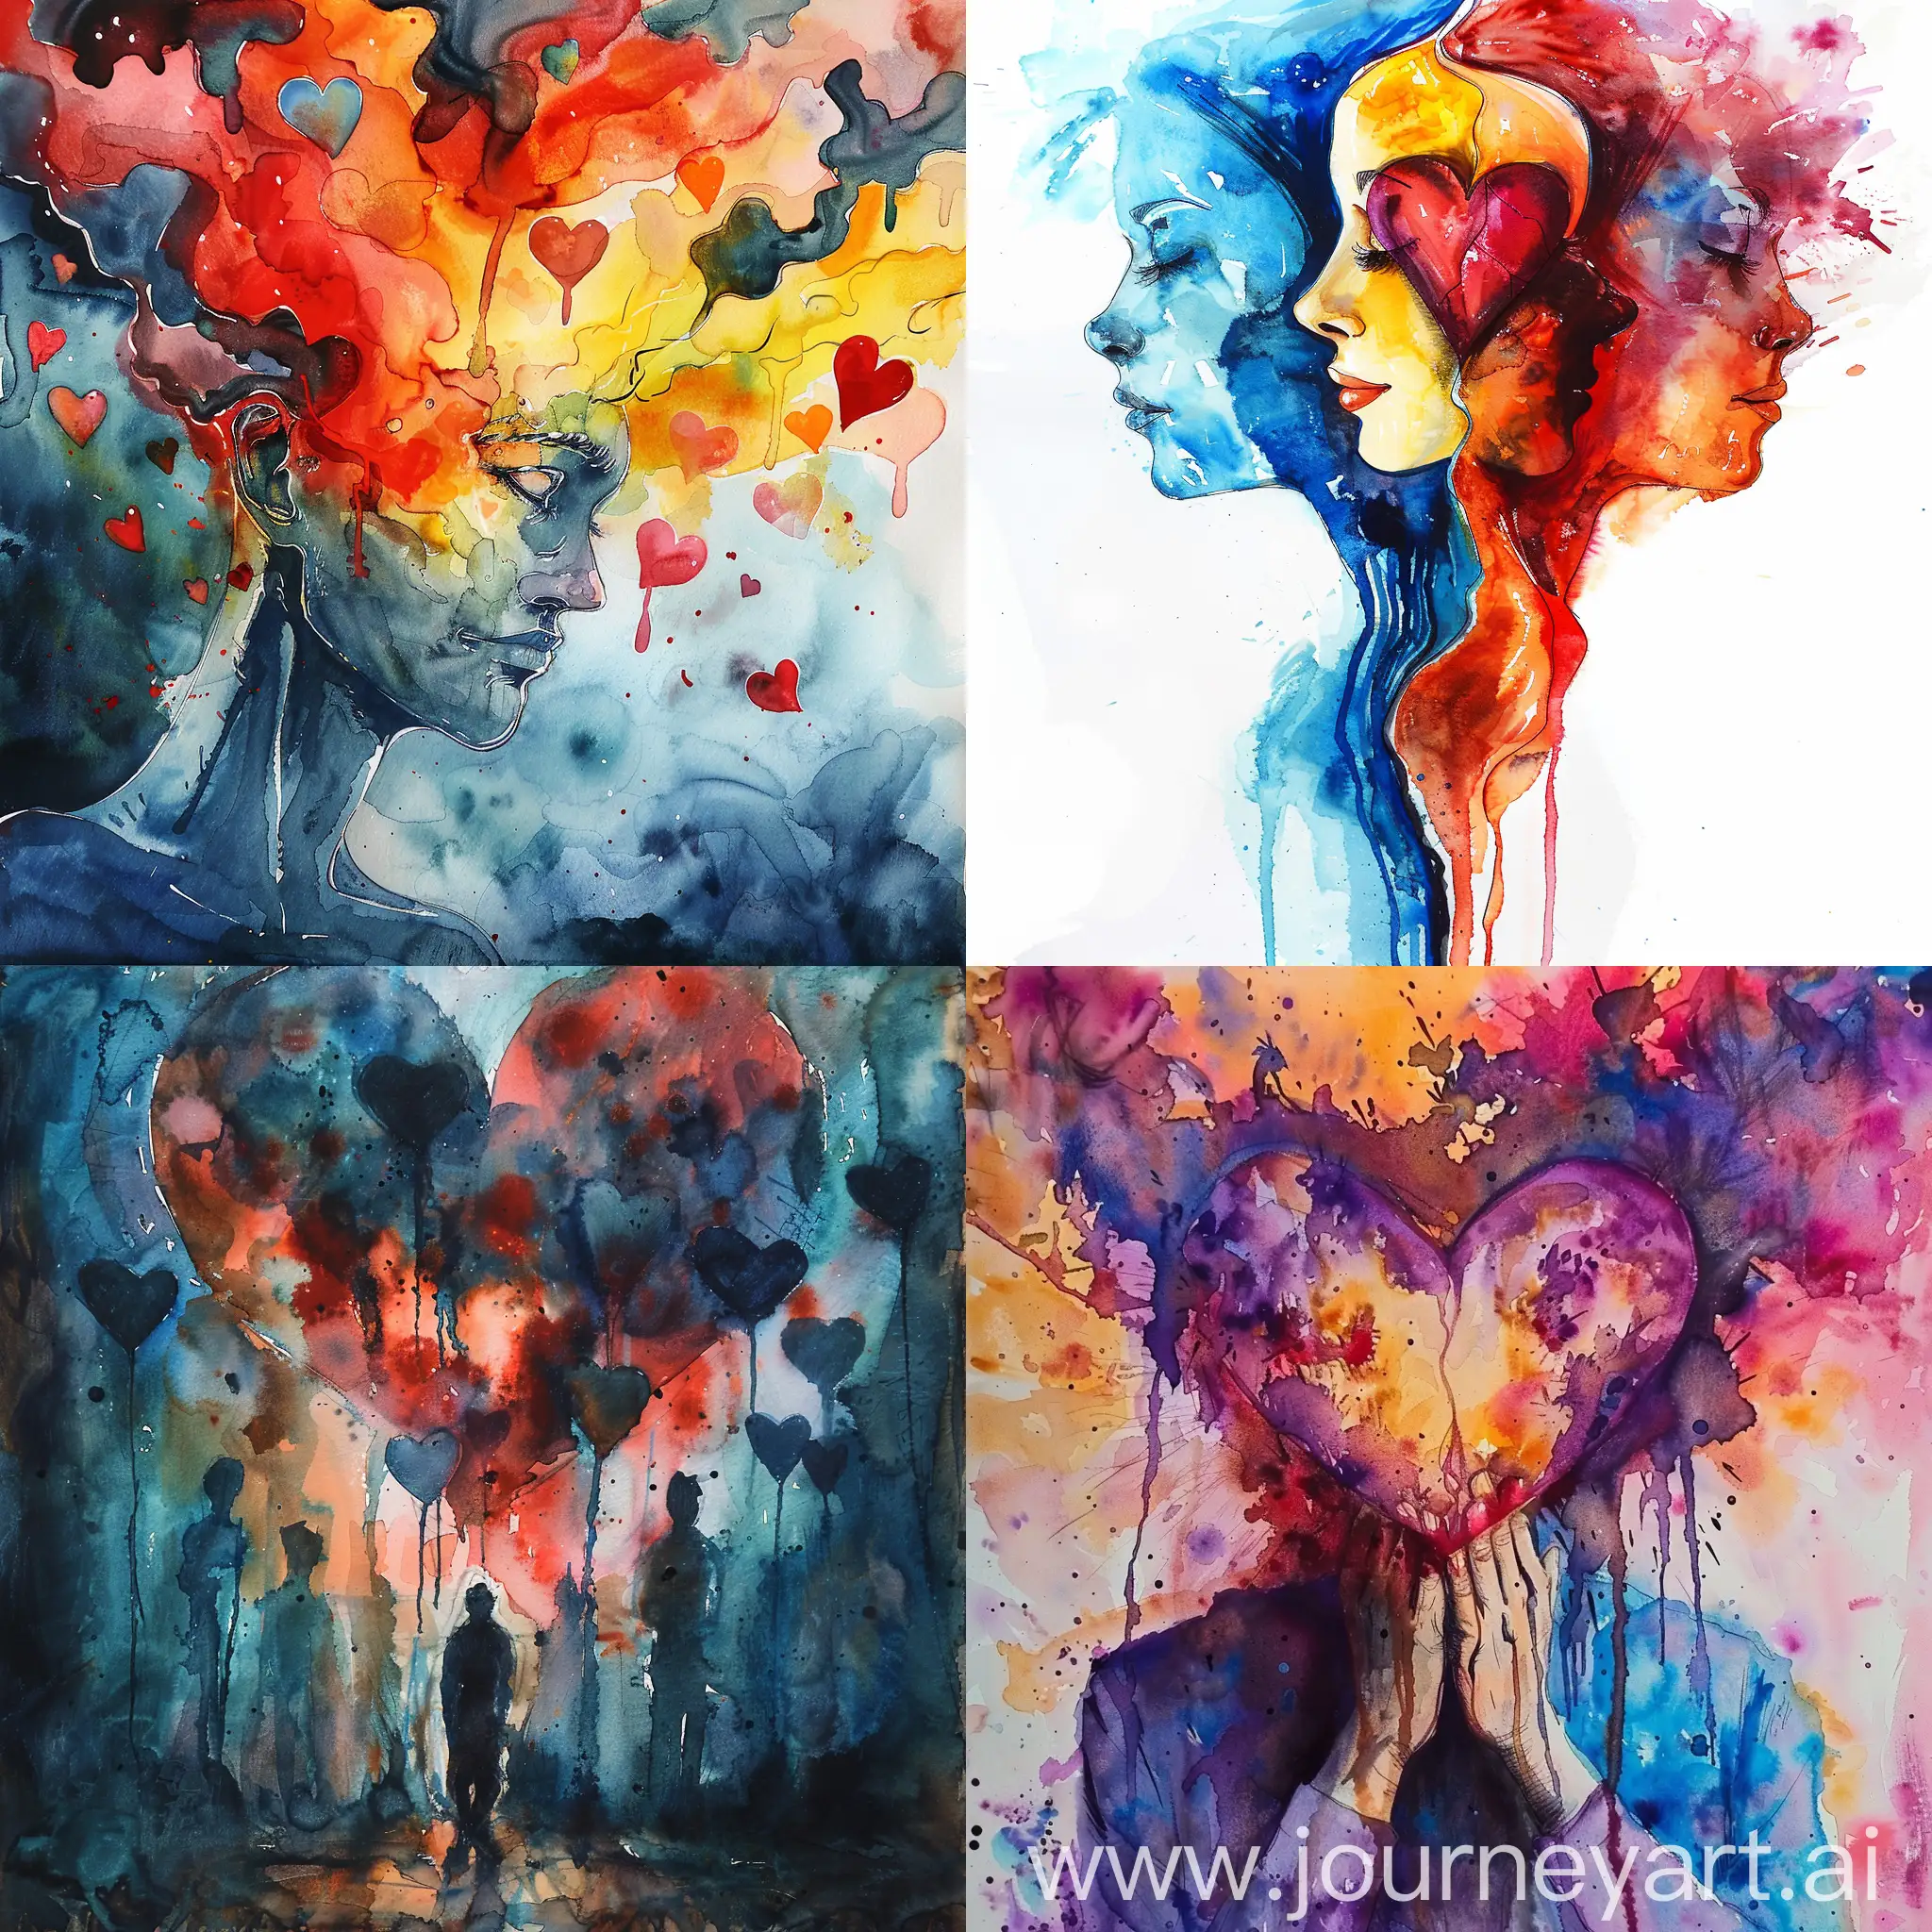 Heartfelt-Community-Emotions-in-Thick-Watercolor-Style